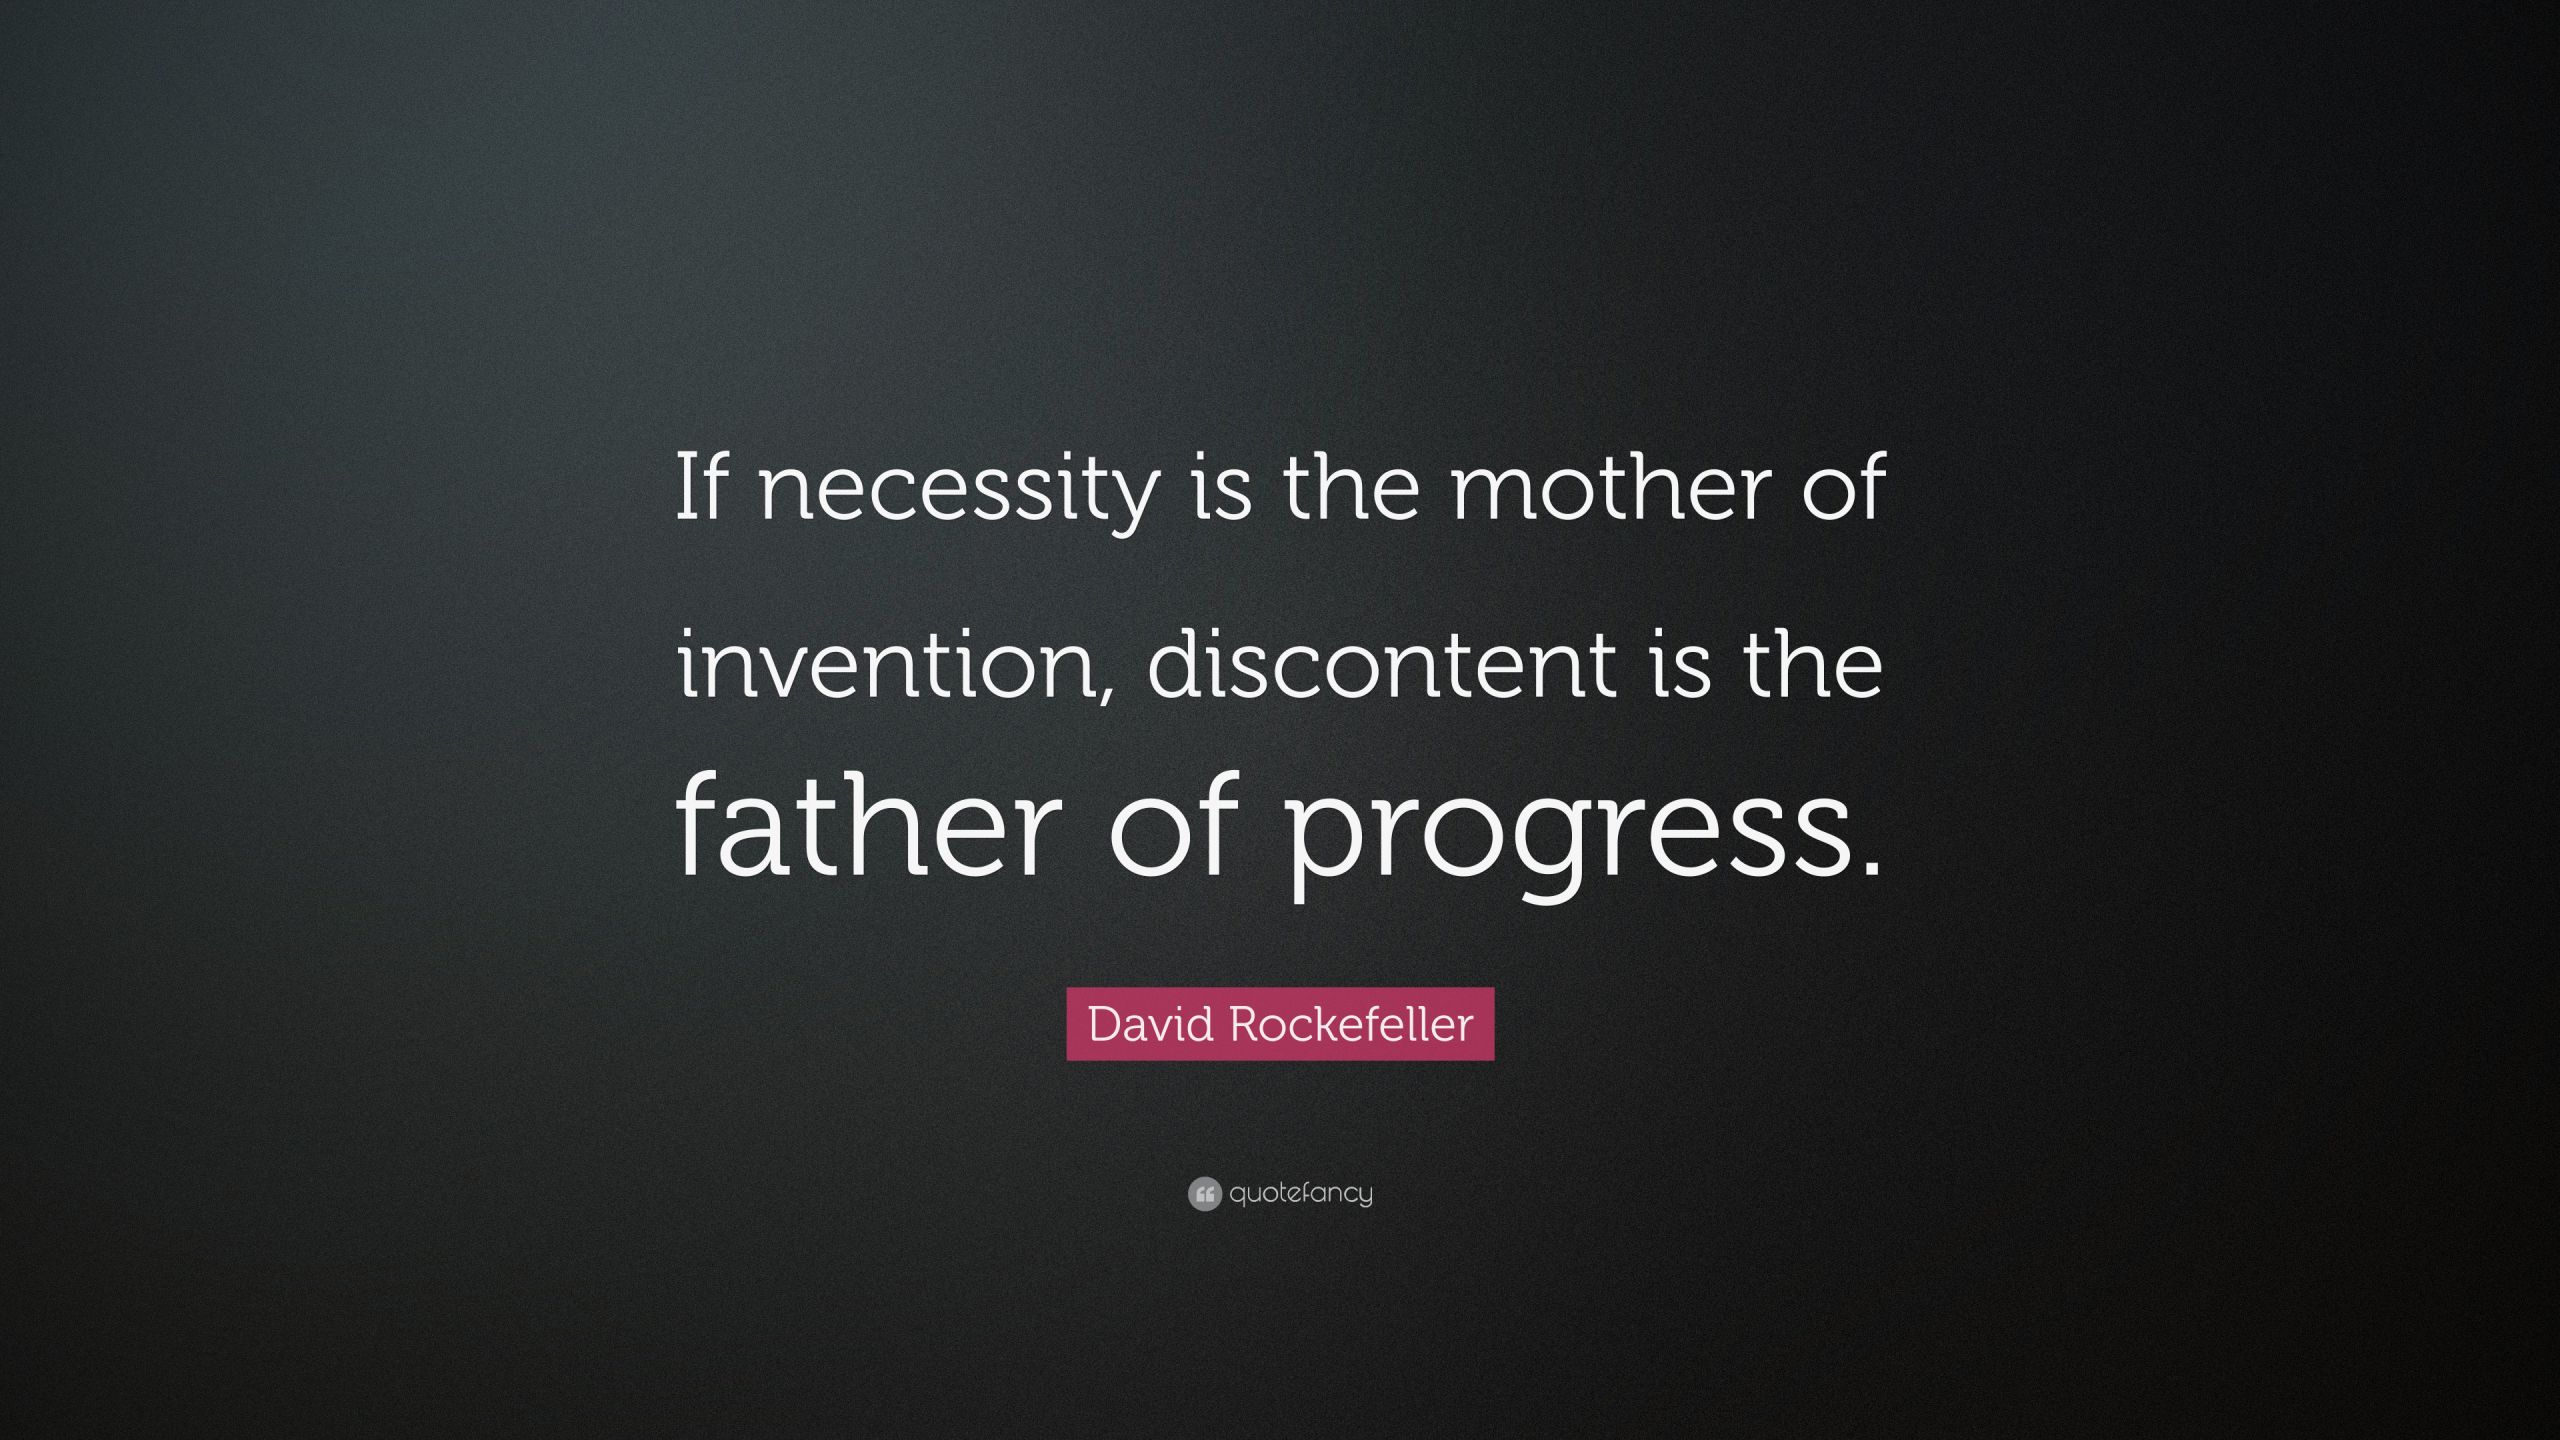 Mother Of Invention Quote
 David Rockefeller Quote “If necessity is the mother of